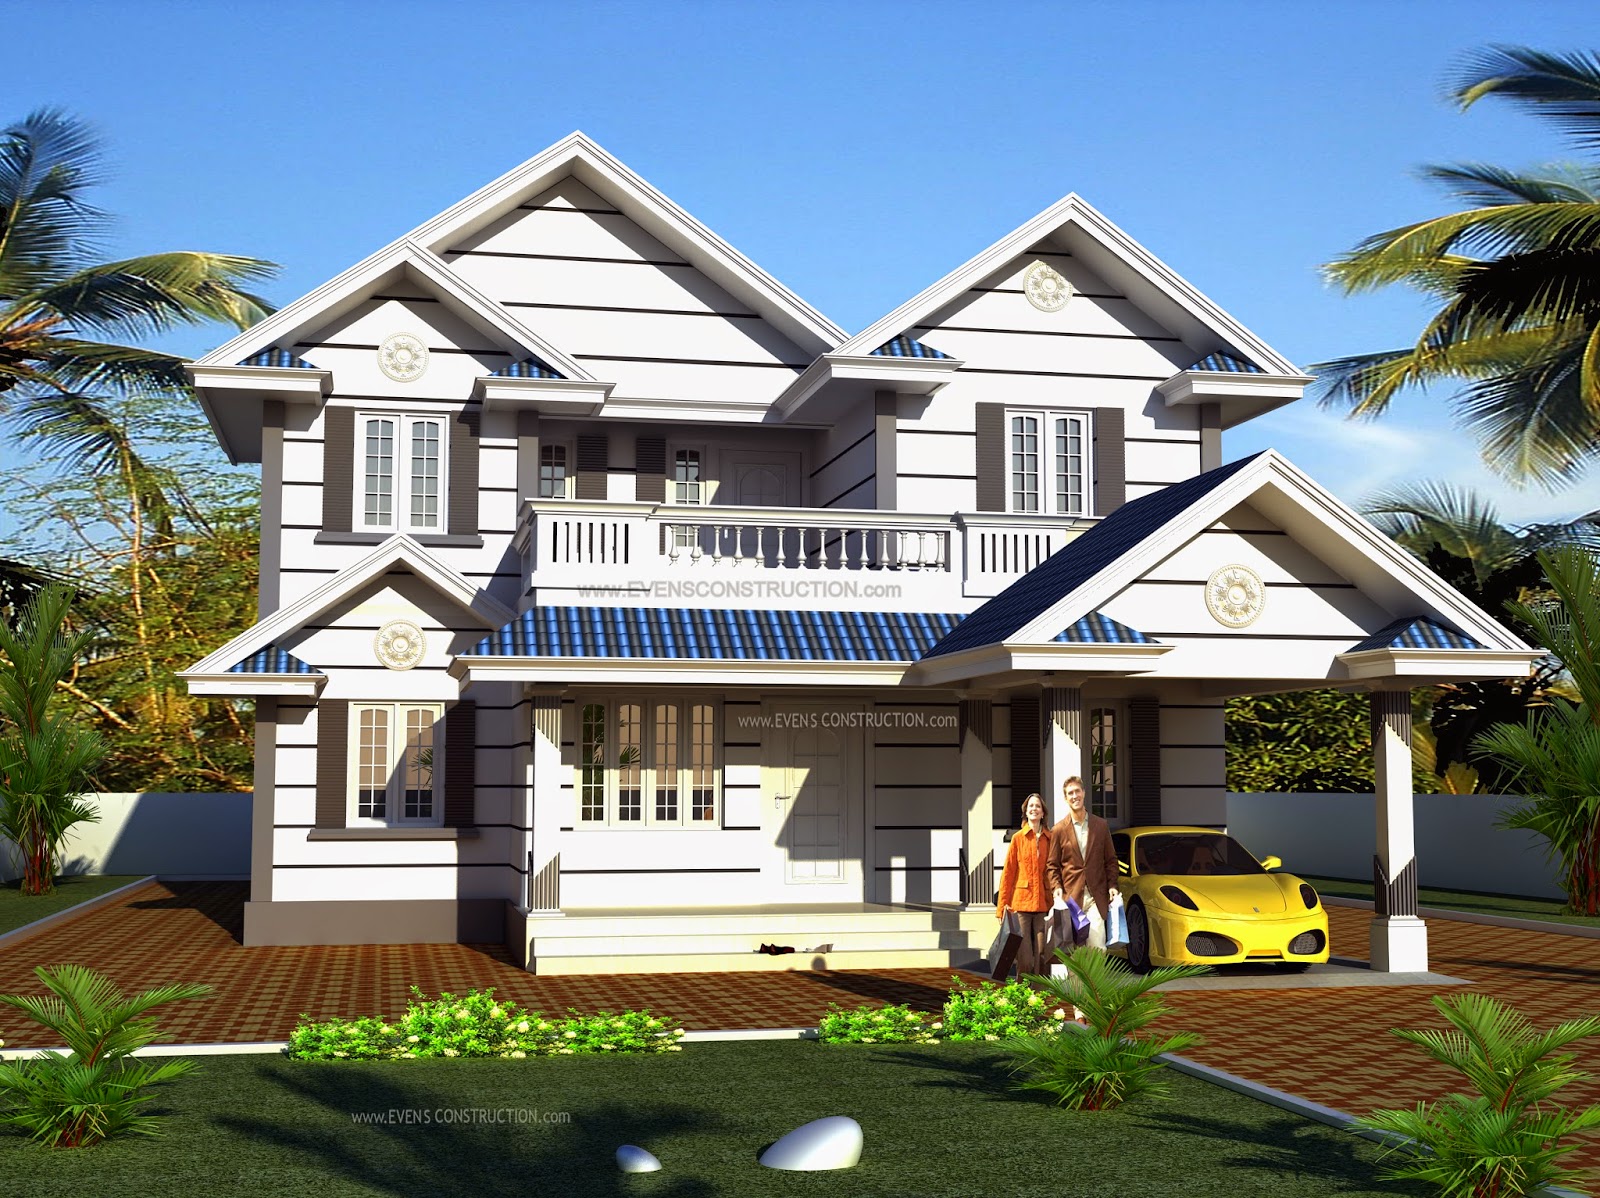 Evens Construction Pvt Ltd: Double storied house with slope roof